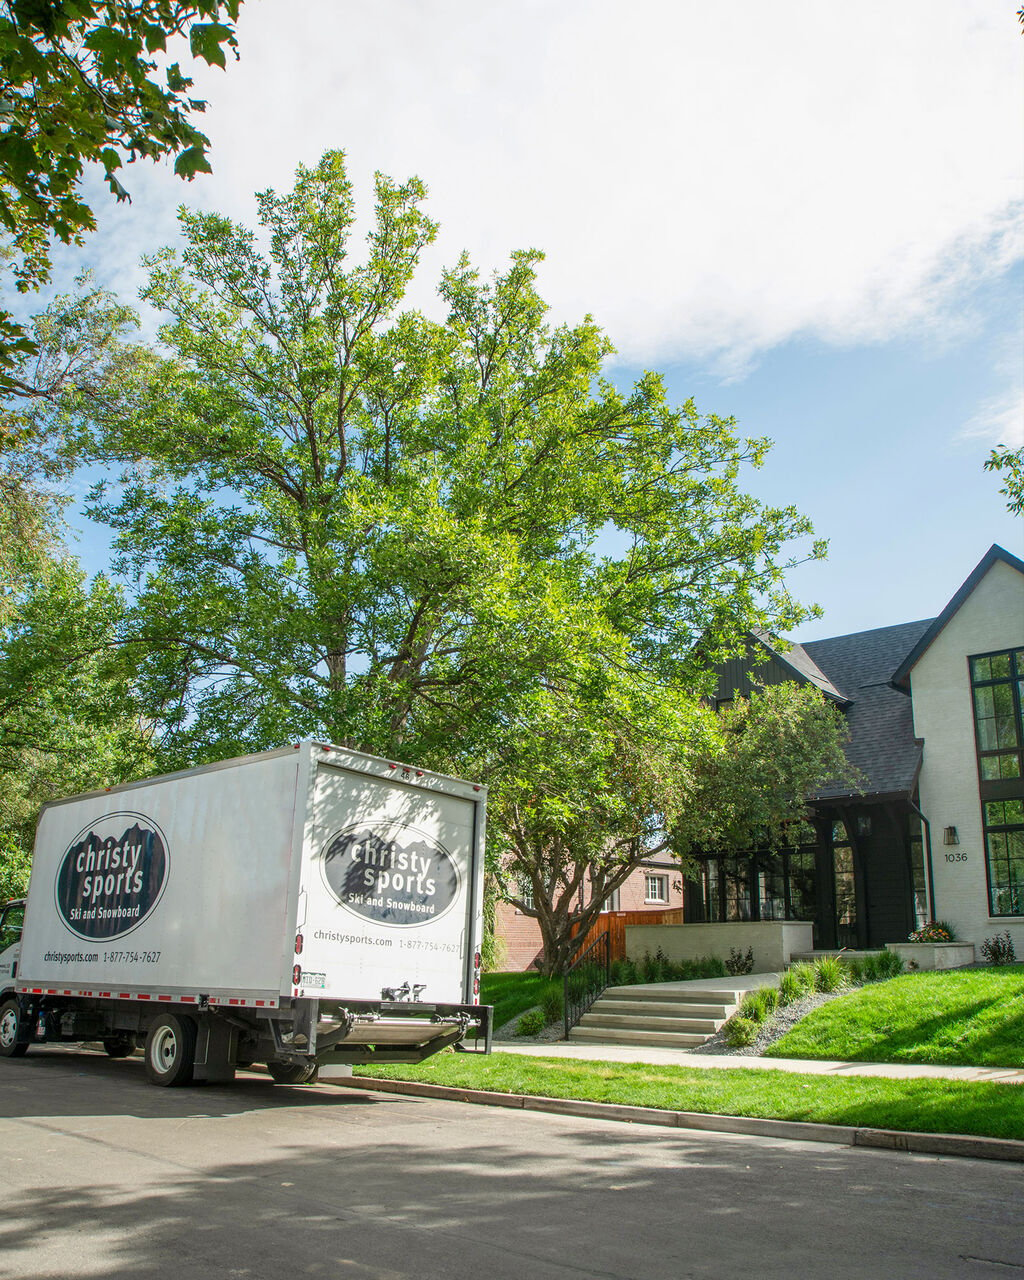 Christy Sports truck delivering outdoor furniture to residential property